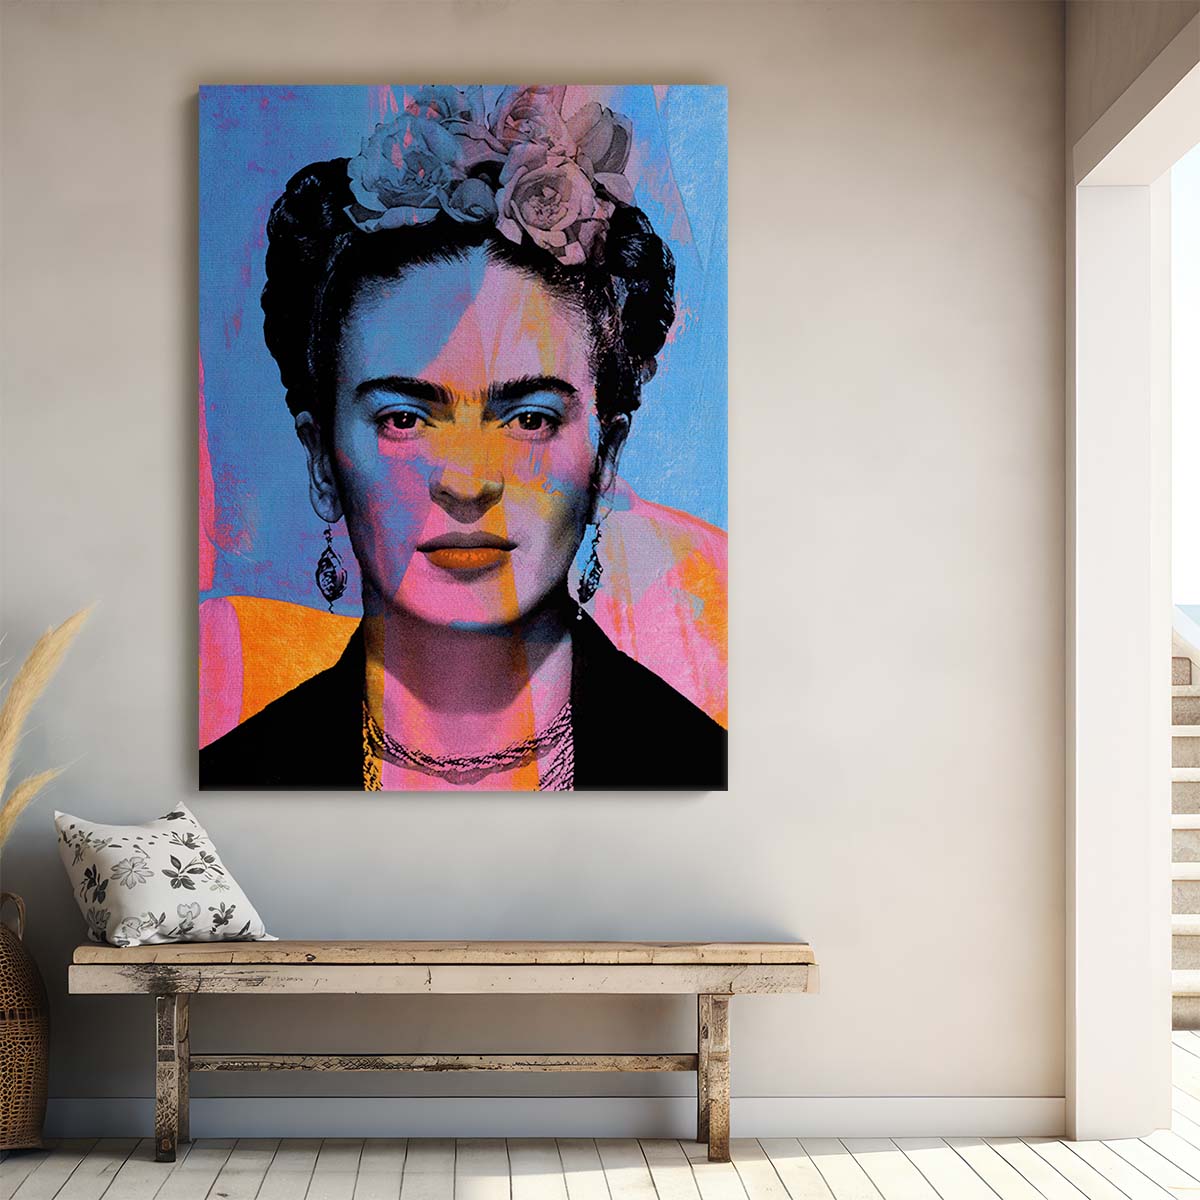 Frida Kahlo Portrait Bright Colors Wall Art by Luxuriance Designs. Made in USA.